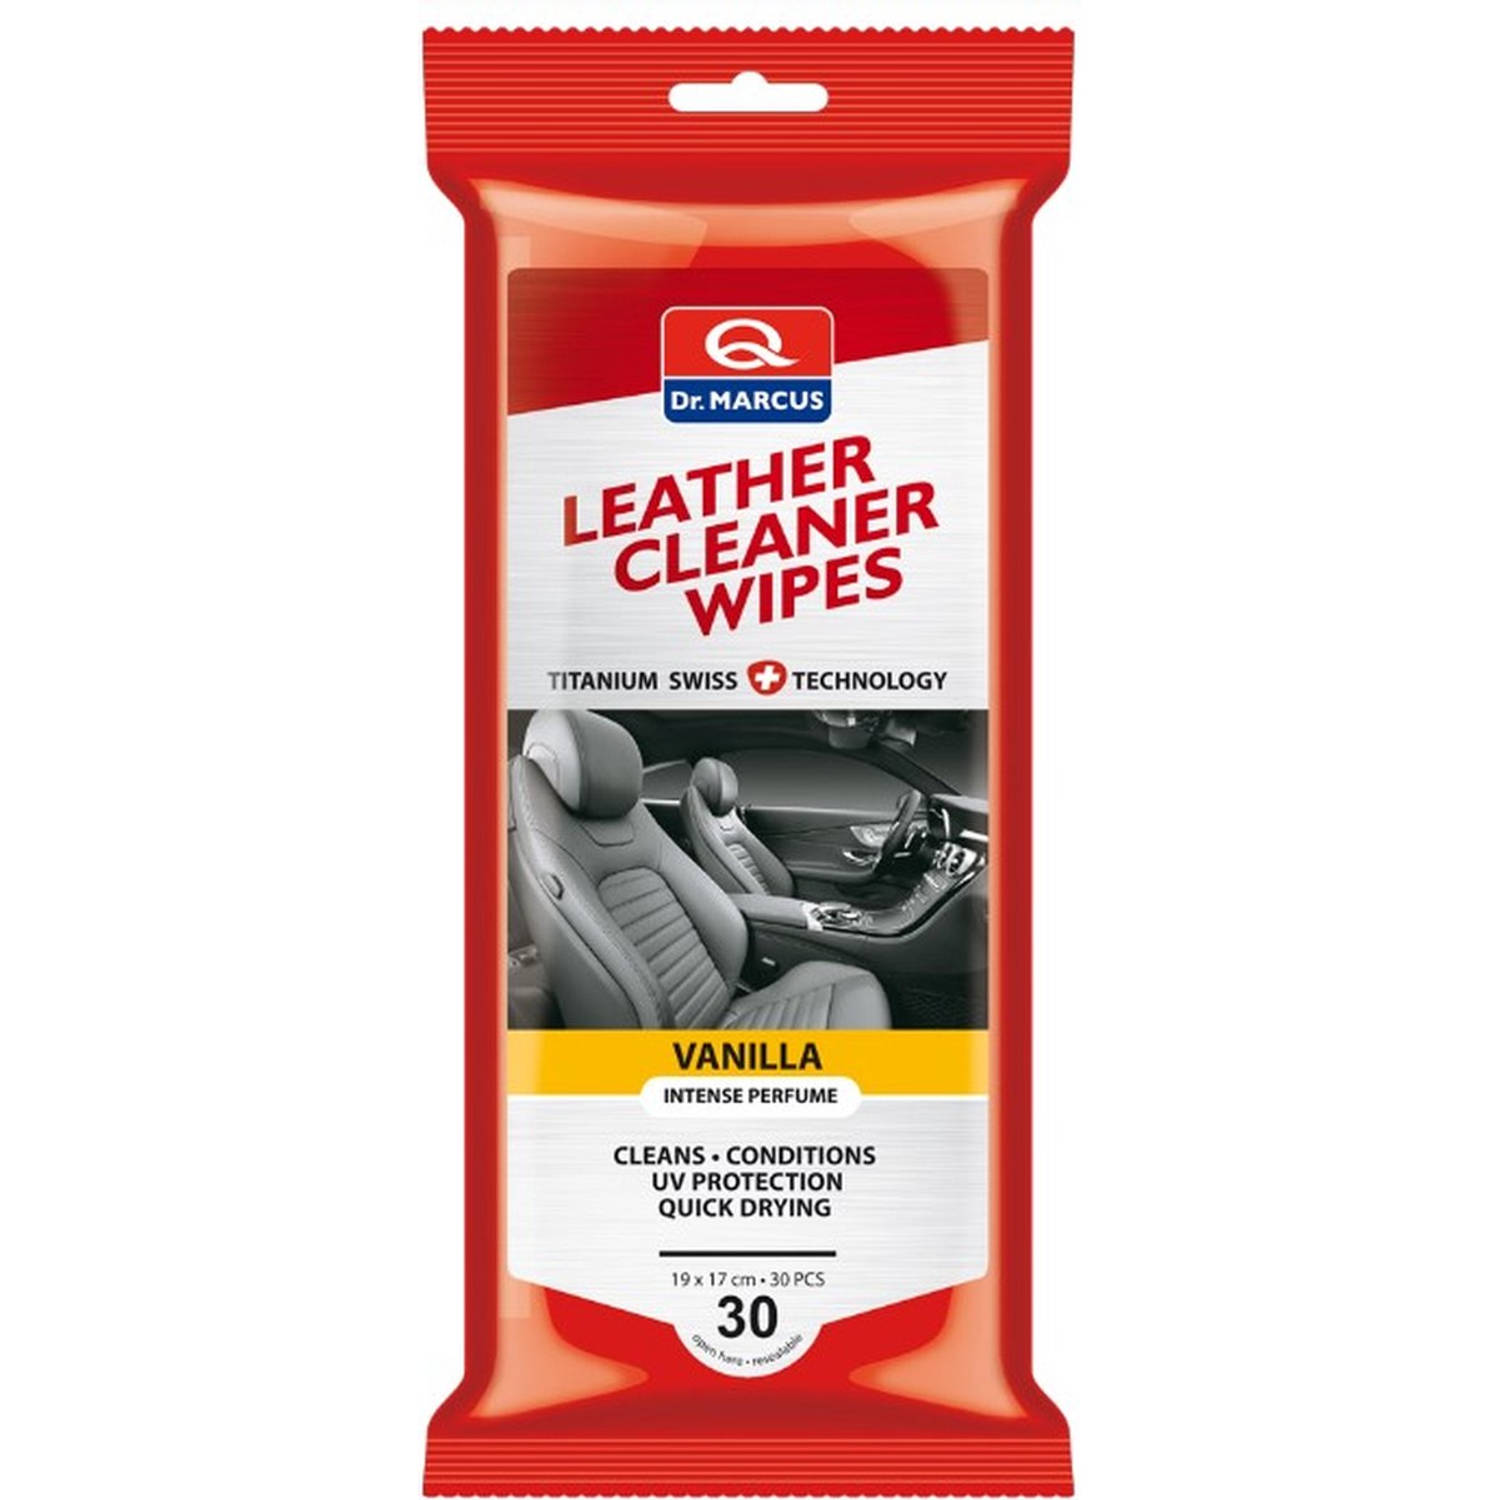 Dr. Marcus Leather cleaning wipes - Vanilla